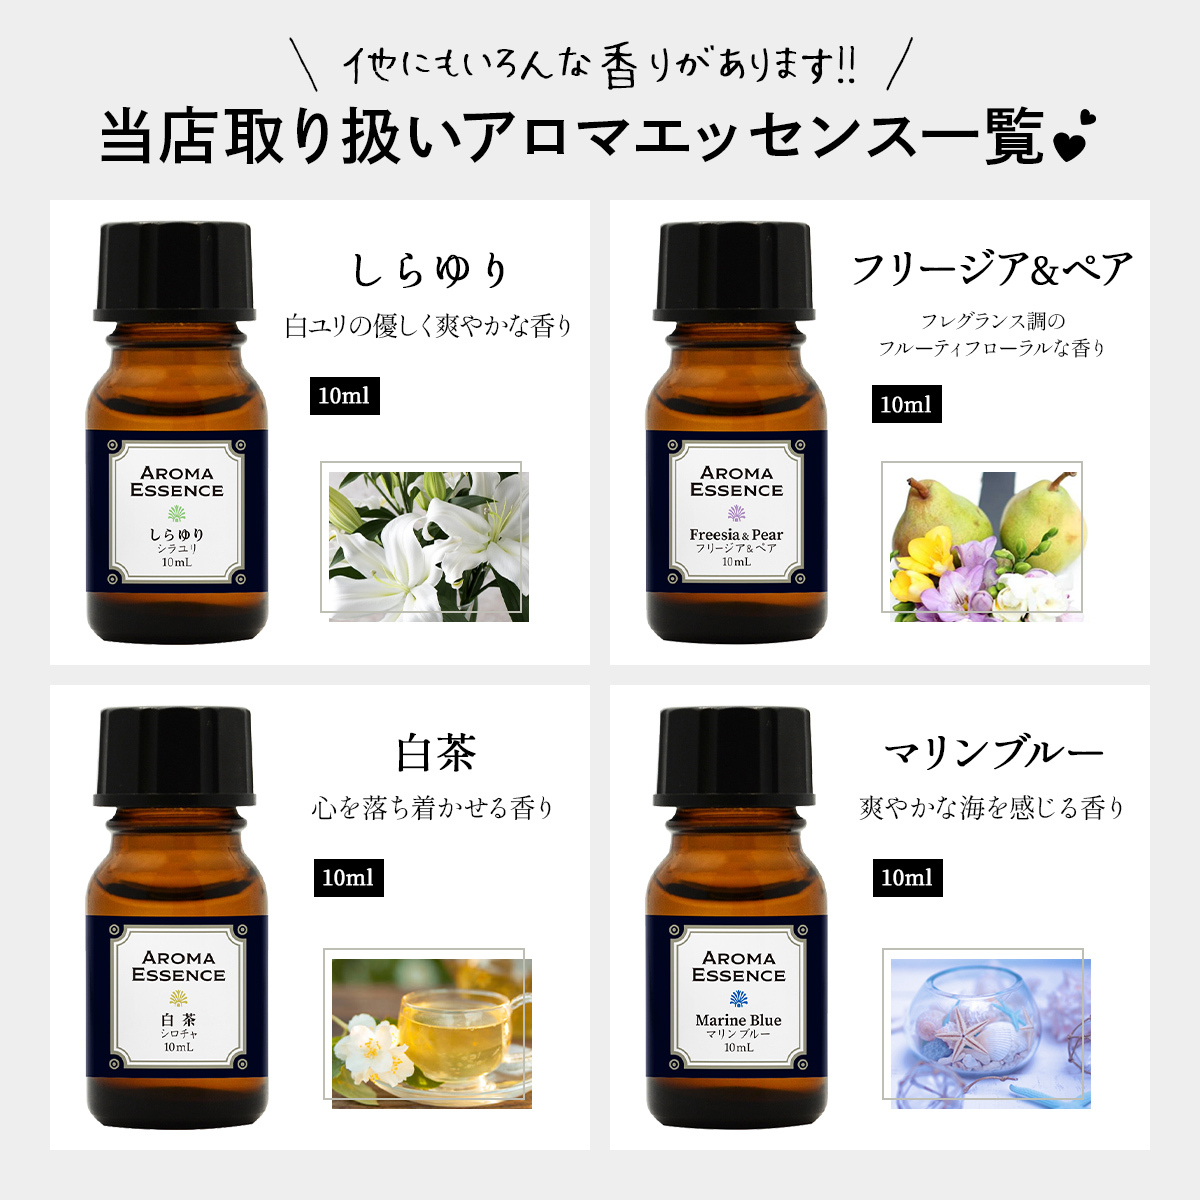  aroma essence freesia & pair 10ml fragrance aroma aroma oil wing lishu pair style . flavoring aroma for flavoring .. essence 